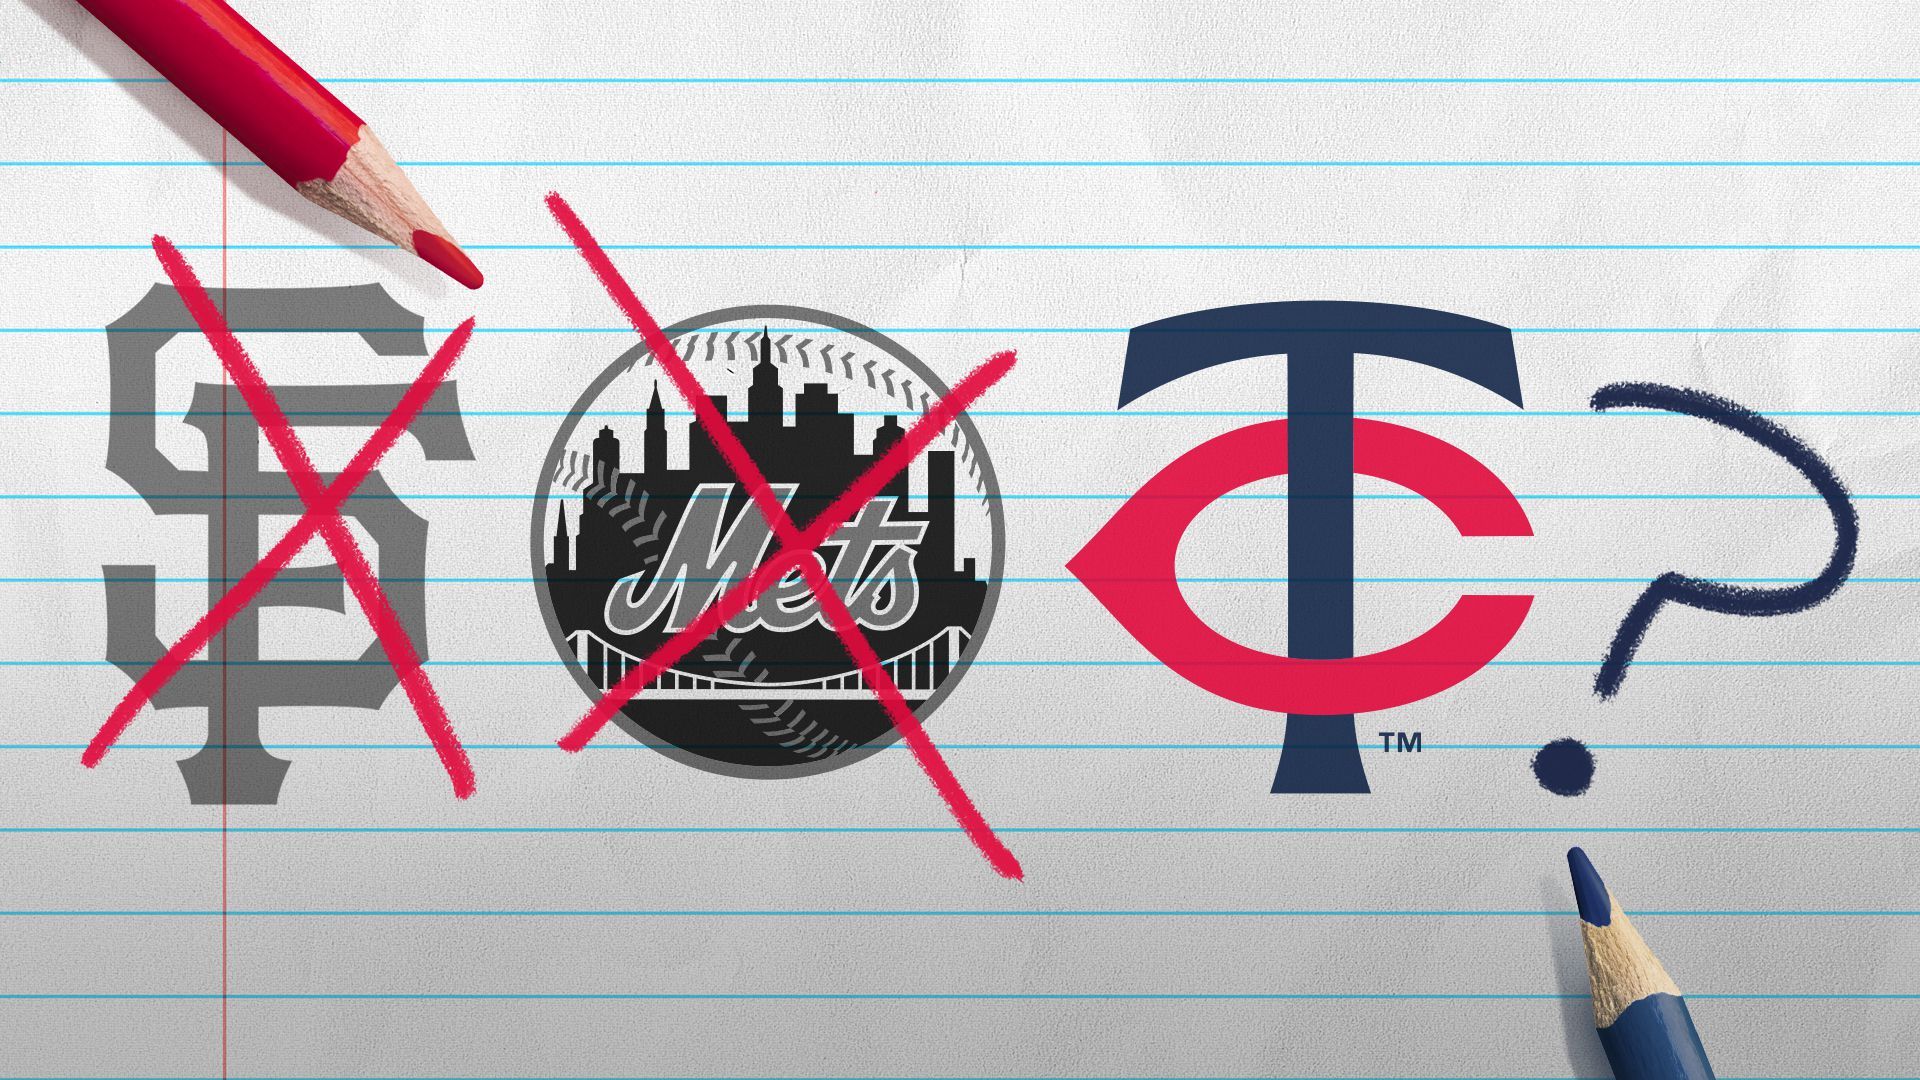 Illustration of the Giants and Mets logo crossed out with a question mark written next to the Twins' logo.